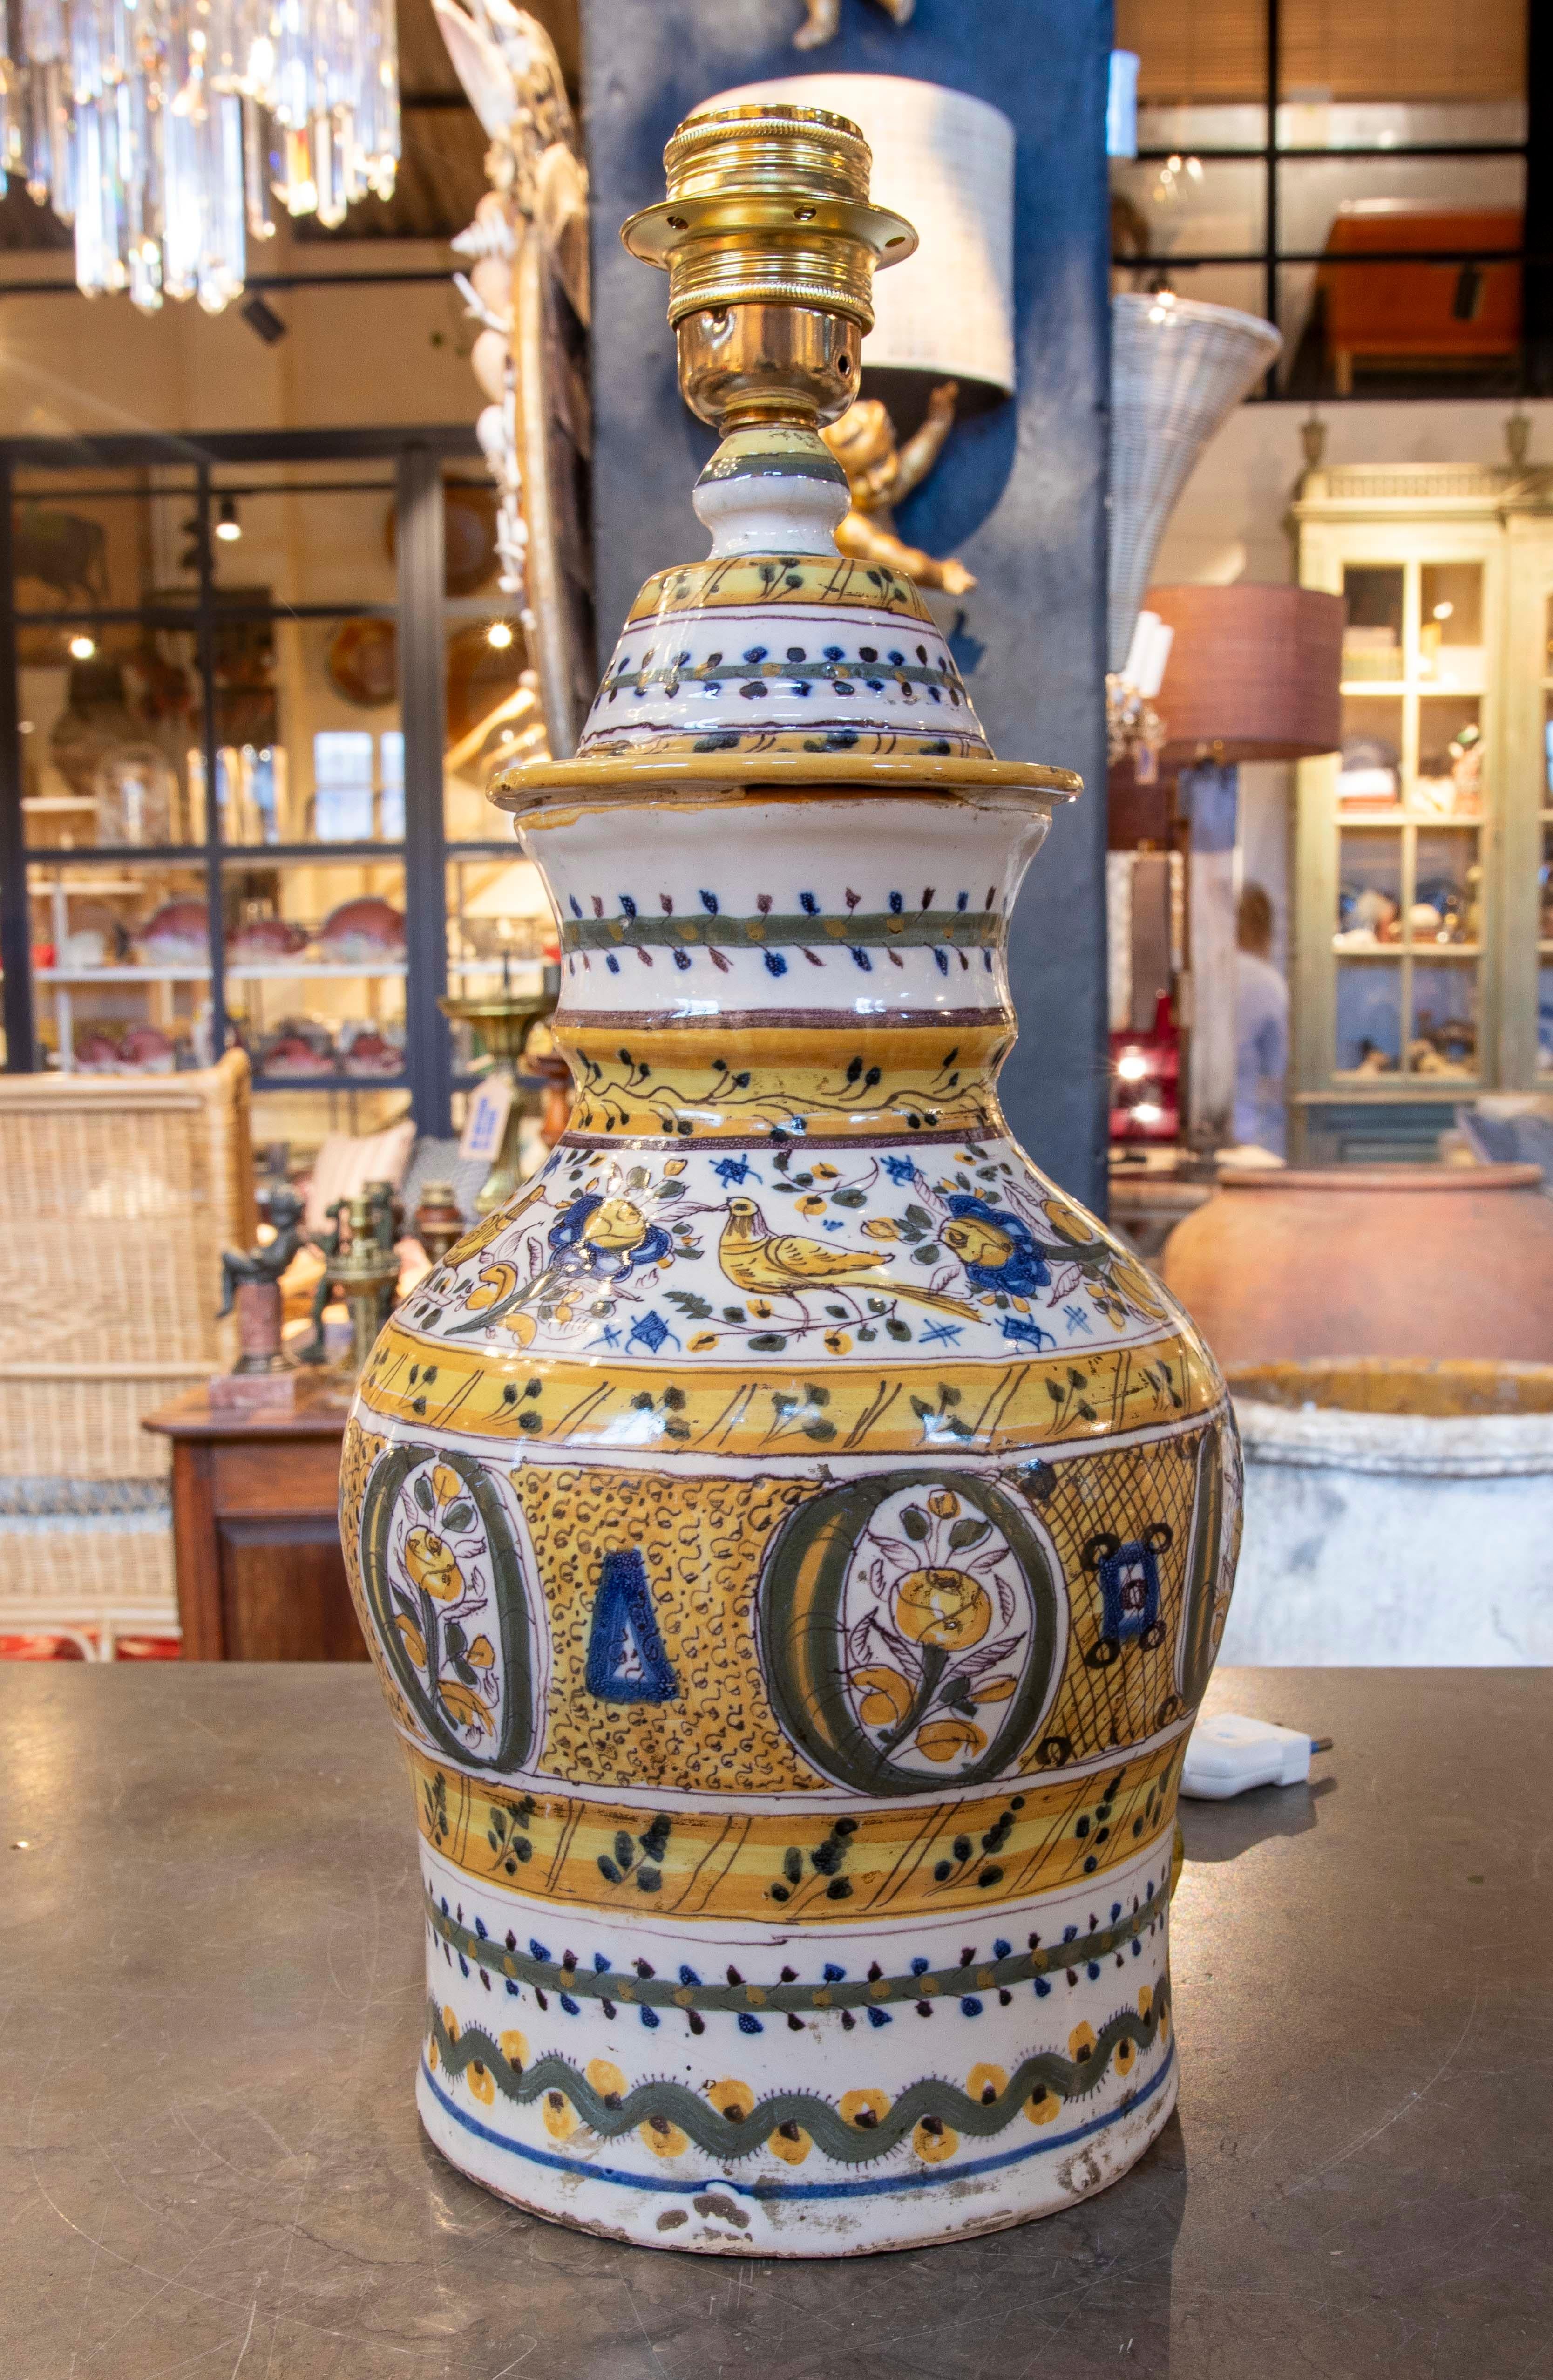 Glazed 19th Century Spanish Talavera Pottery Turned into a Table Lamp For Sale